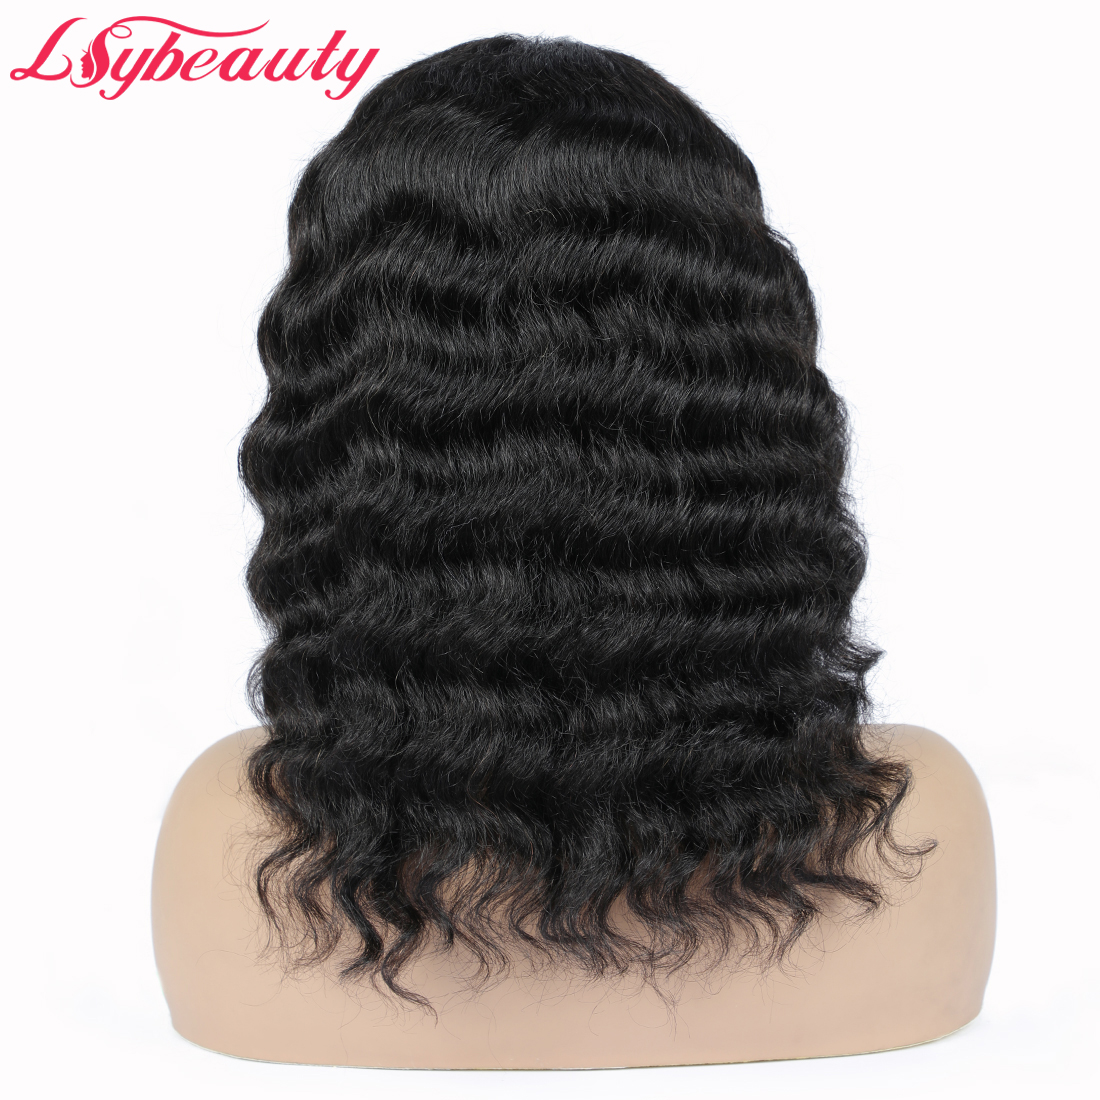 Lsybeauty Deep Wave Human Hair Wigs For Sales My First Wig Natural Black 1B Color Affordable Luvme Hair Wigs For Women